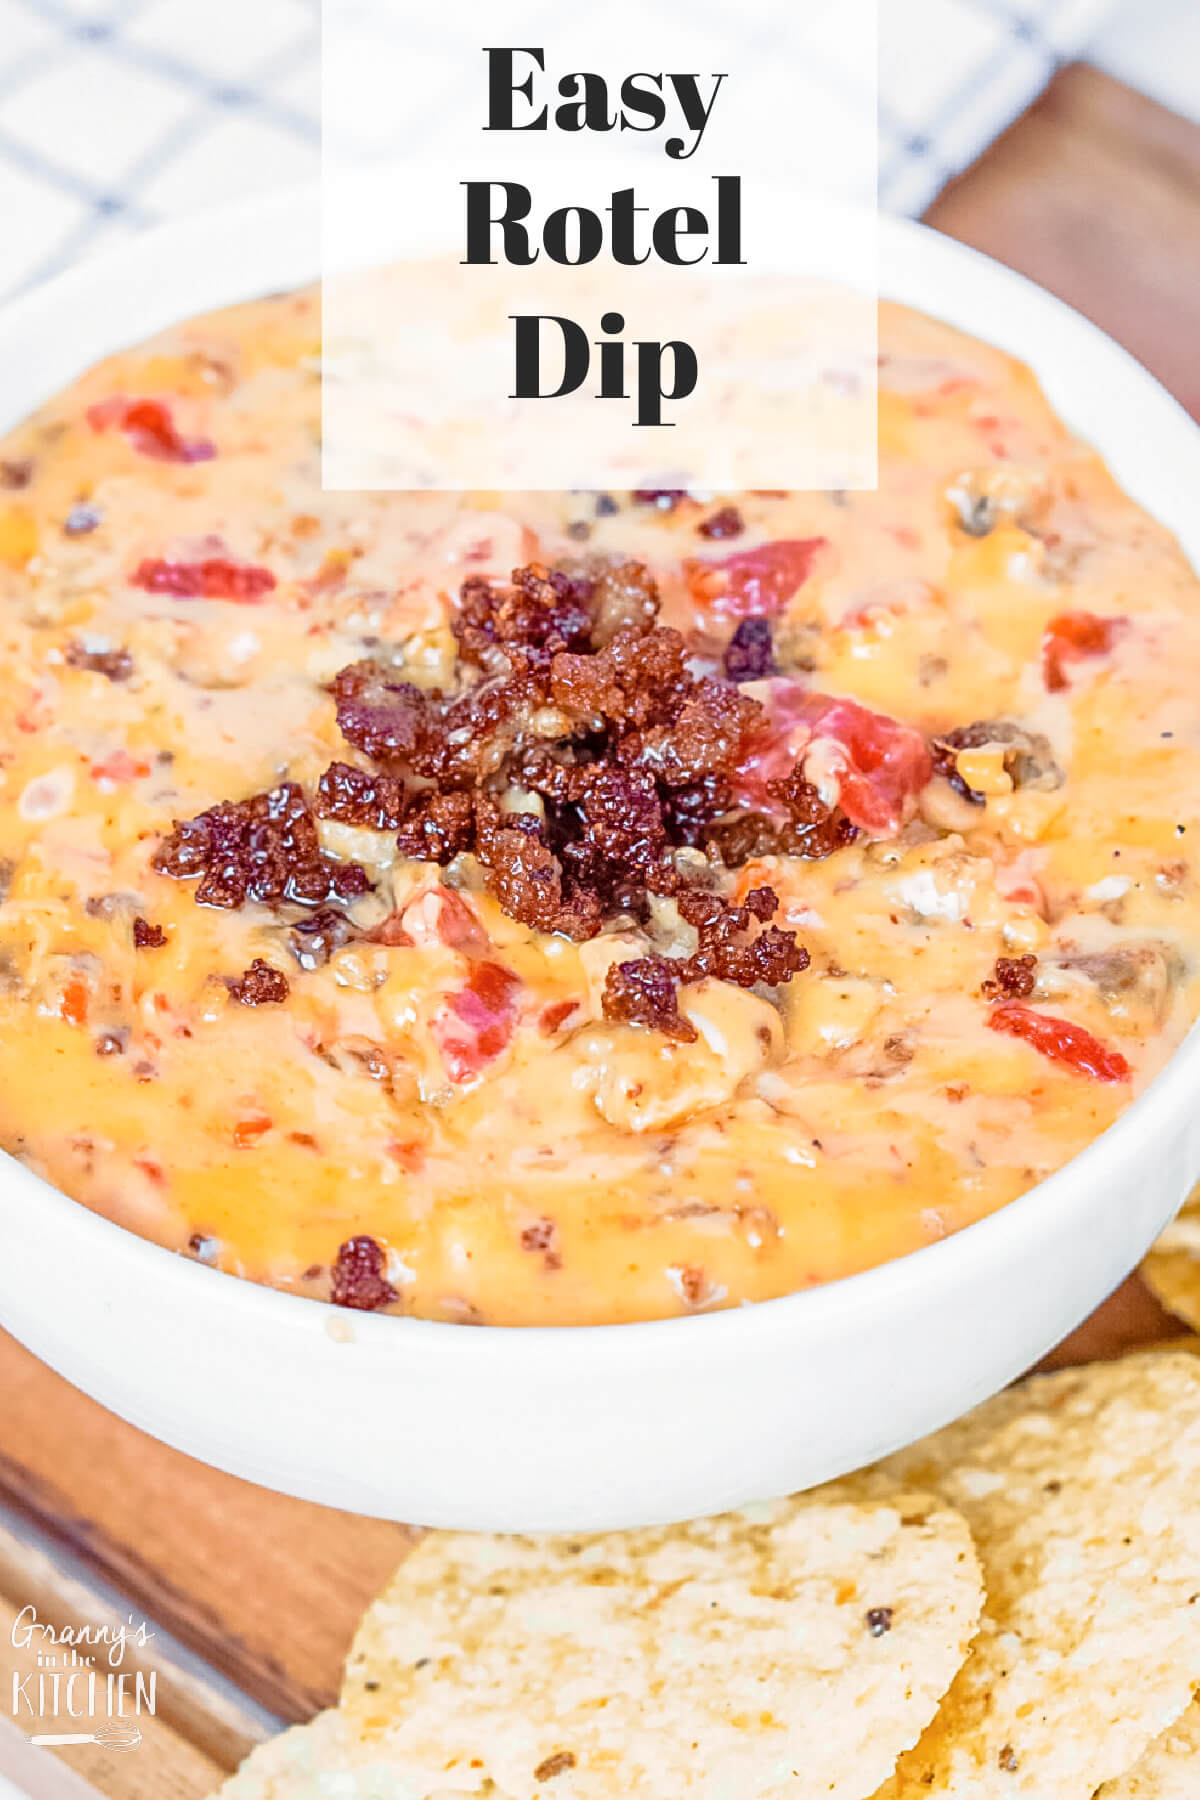 bowl of cheesy dip; text overlay "Easy Rotel Dip"